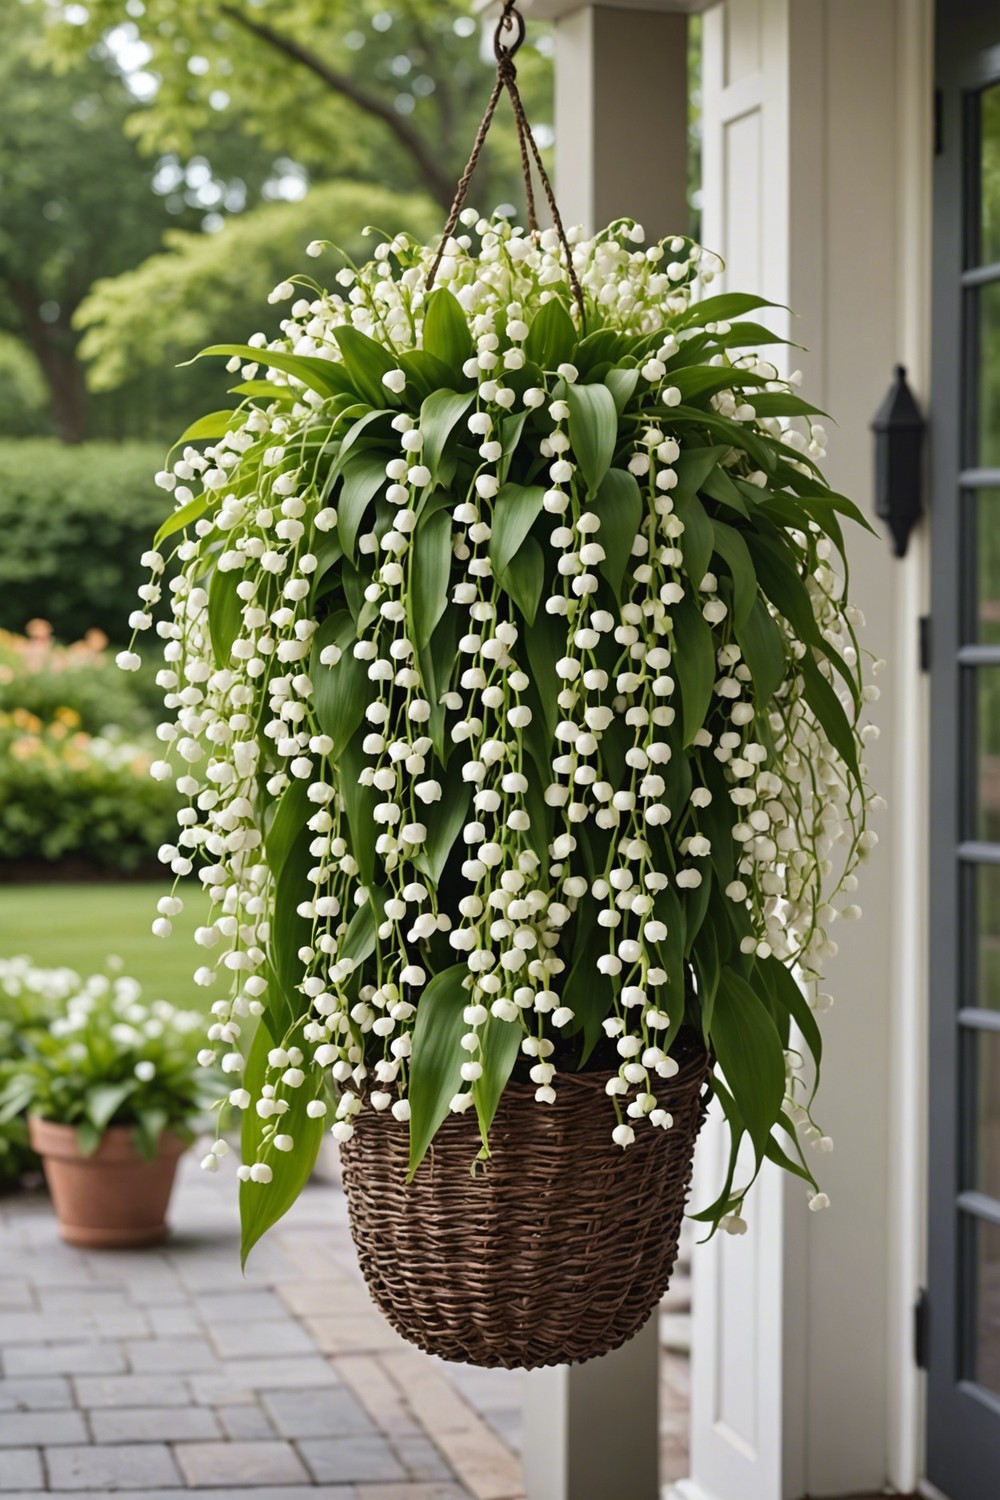 Plant Lily of the Valley in a Hanging Basket for a Beautiful Display